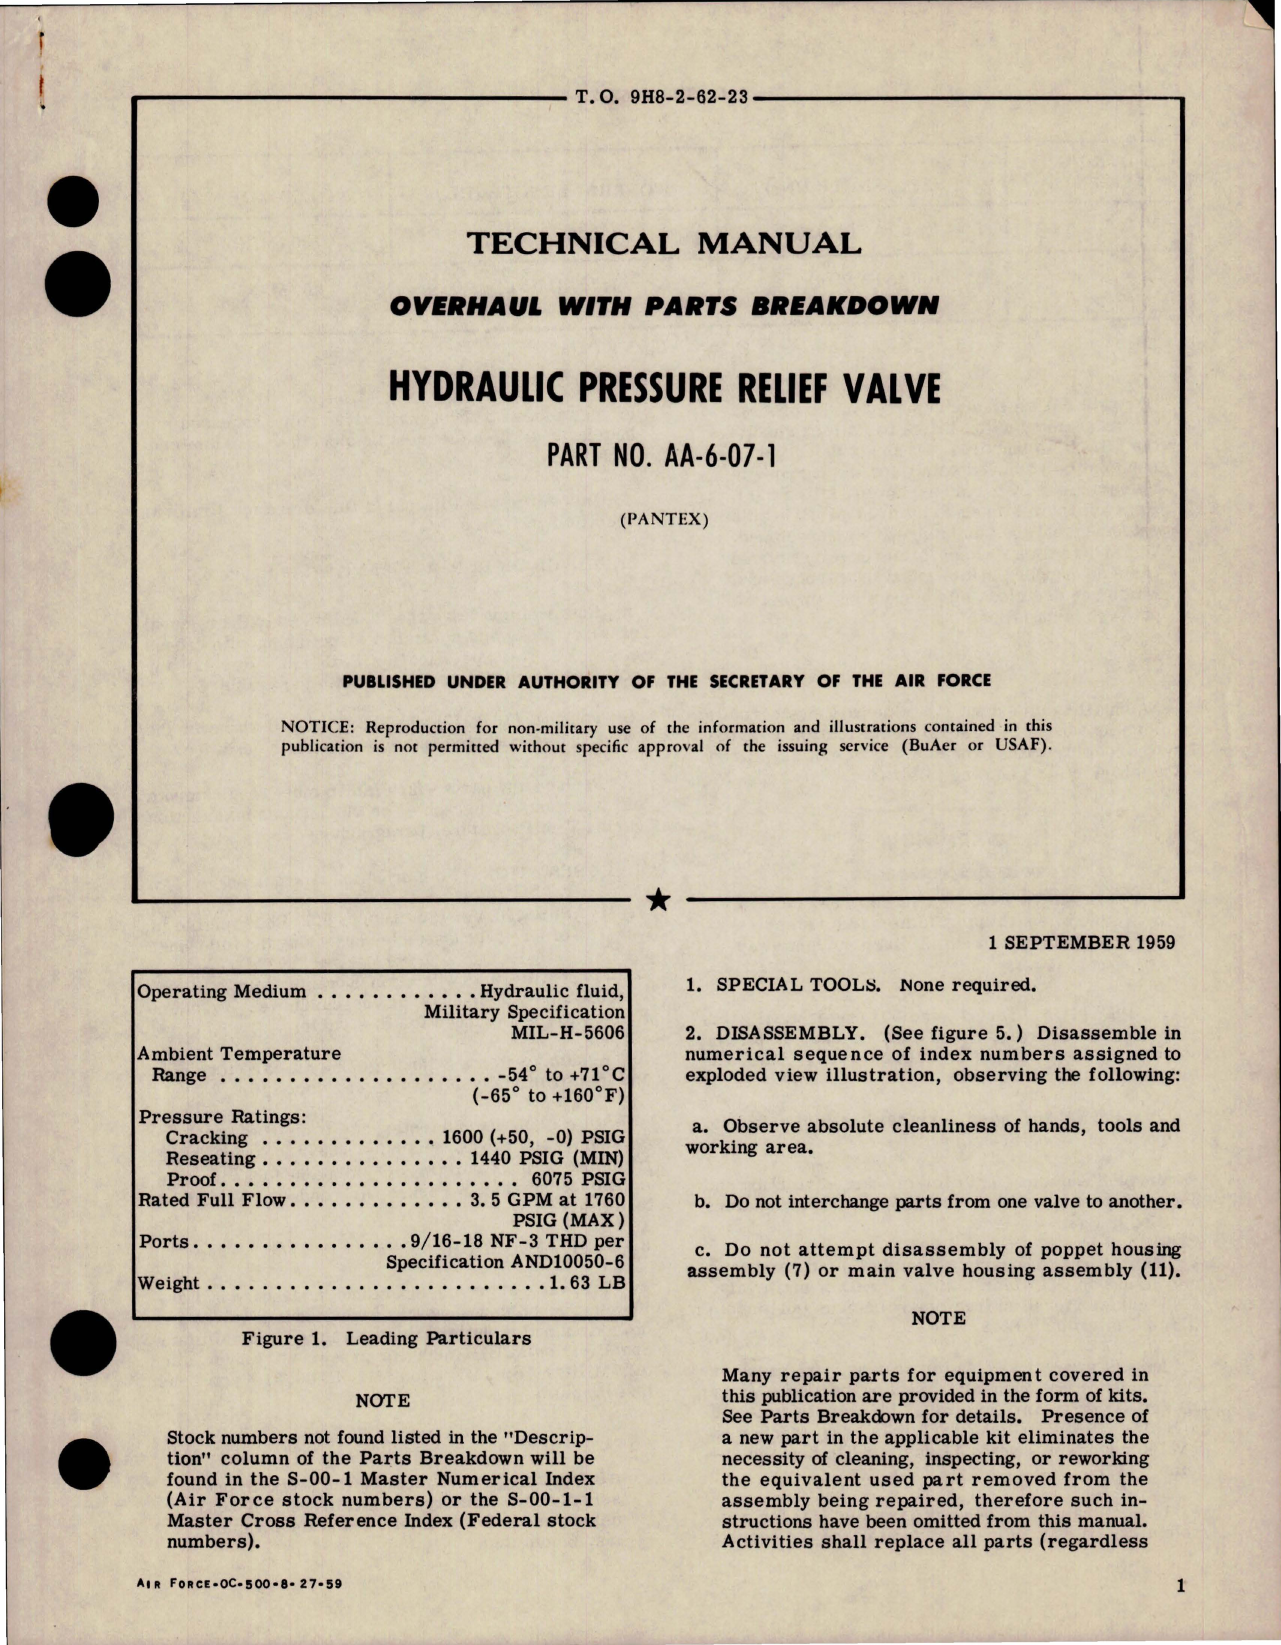 Sample page 1 from AirCorps Library document: Overhaul with Parts Breakdown for Hydraulic Pressure Relief Valve - Part AA-6-07-1